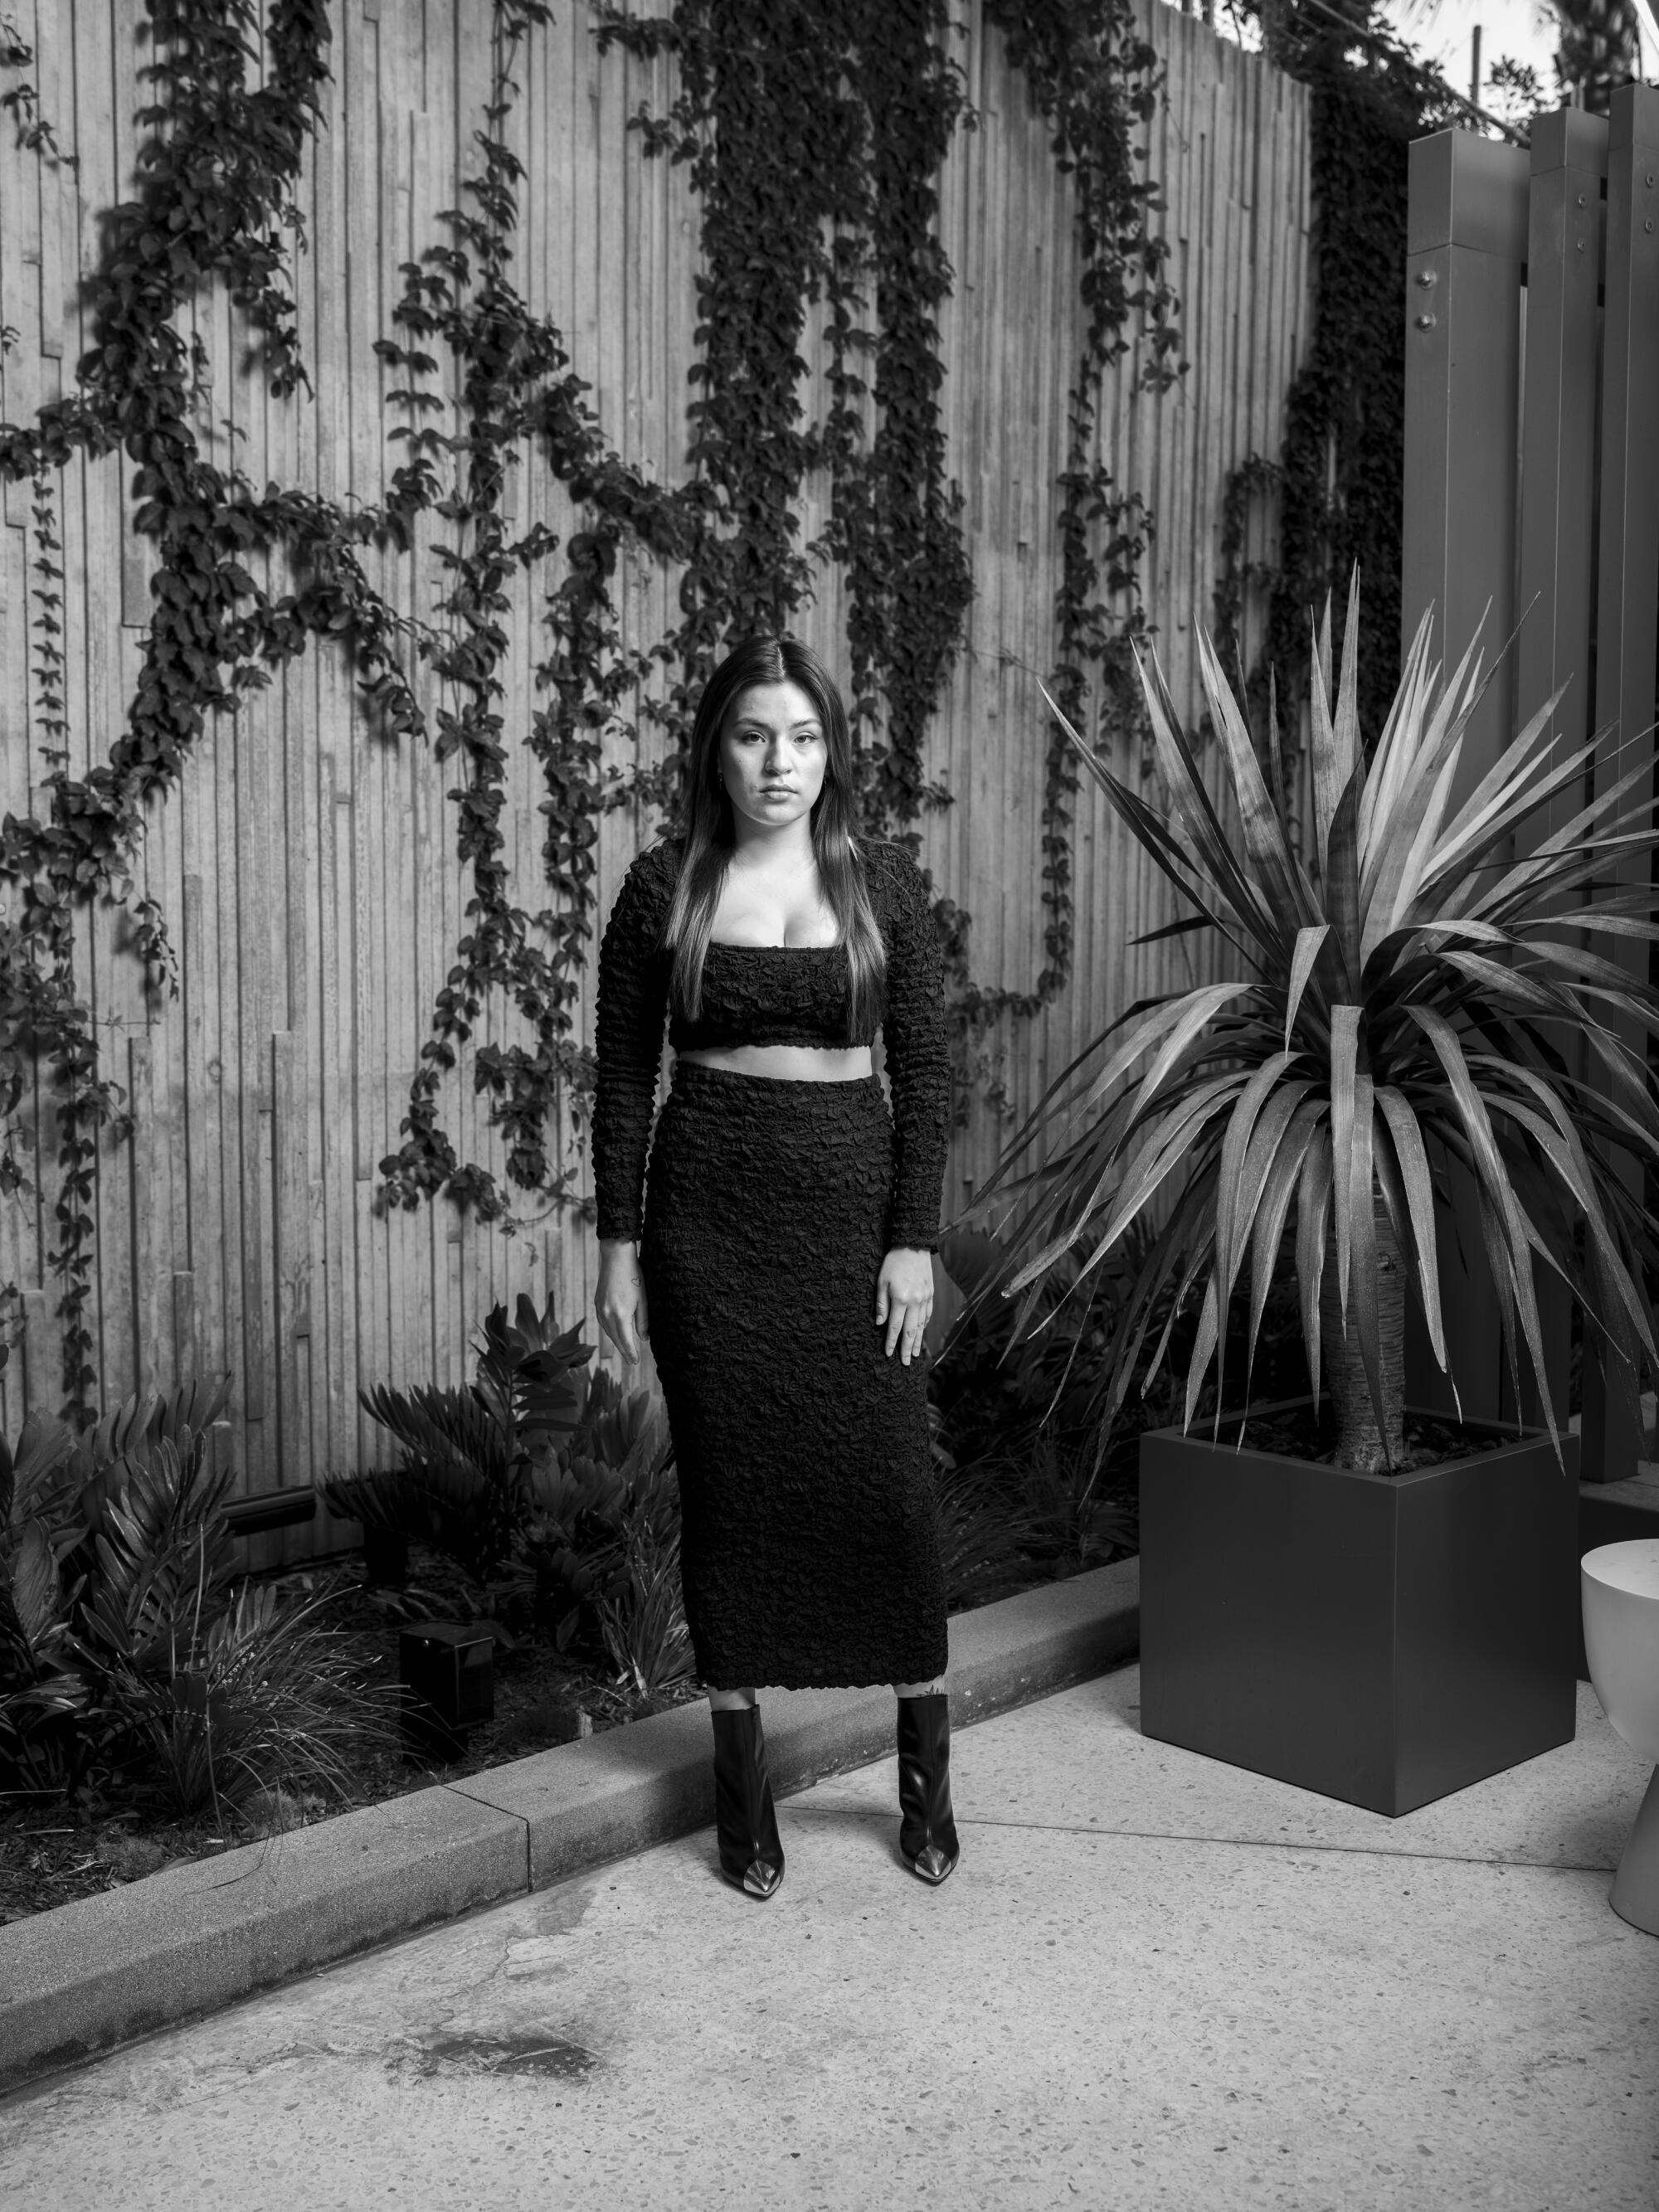 A young woman in a black, two-piece dress poses for a portrait in a courtyard.